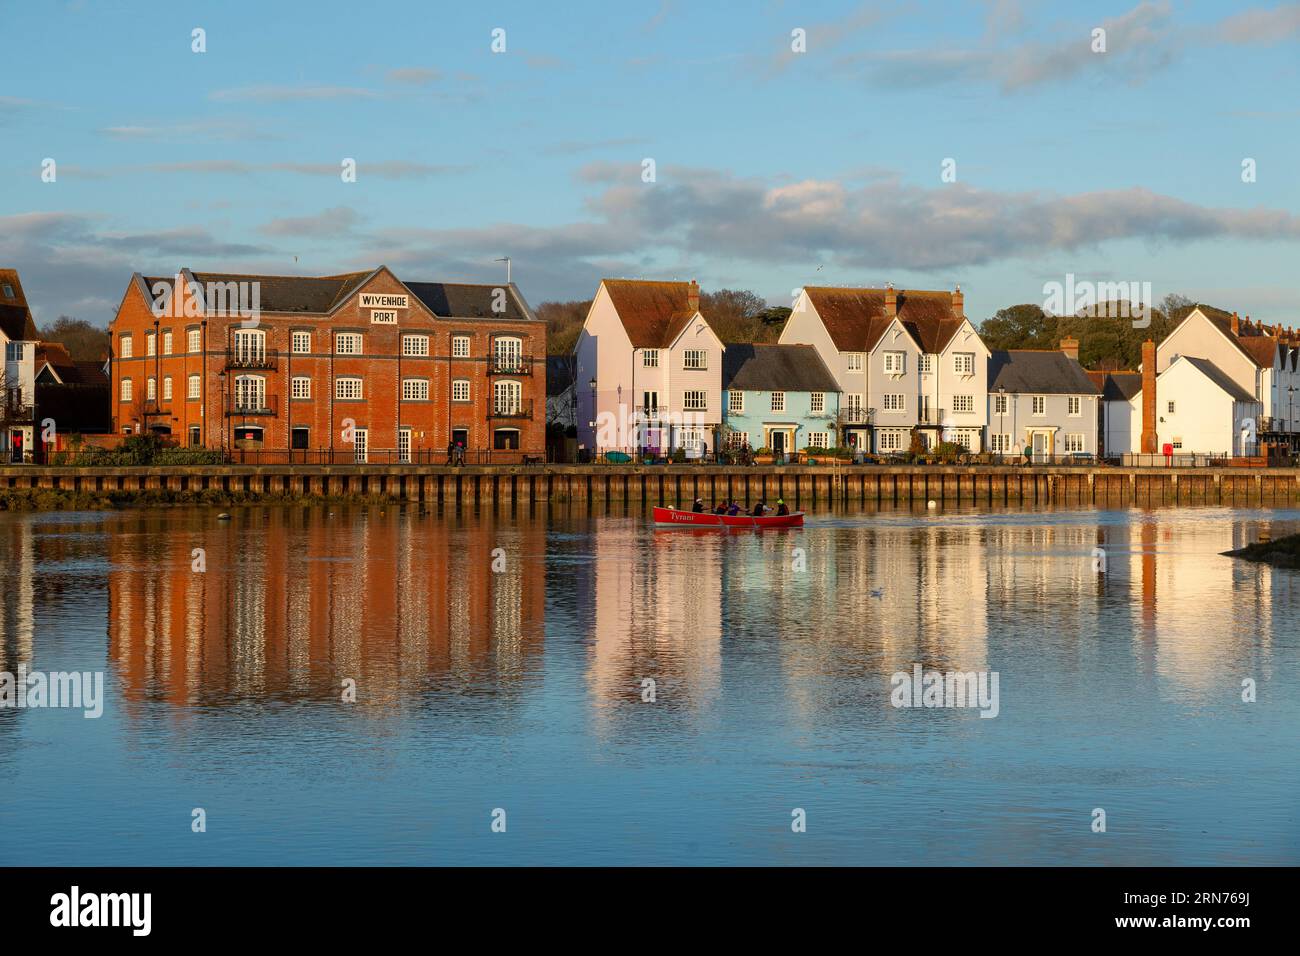 Late on a December afternoon, a riverside housing development of new, old and refurbished property almost glows in setting sun light under a blue sky. Stock Photo